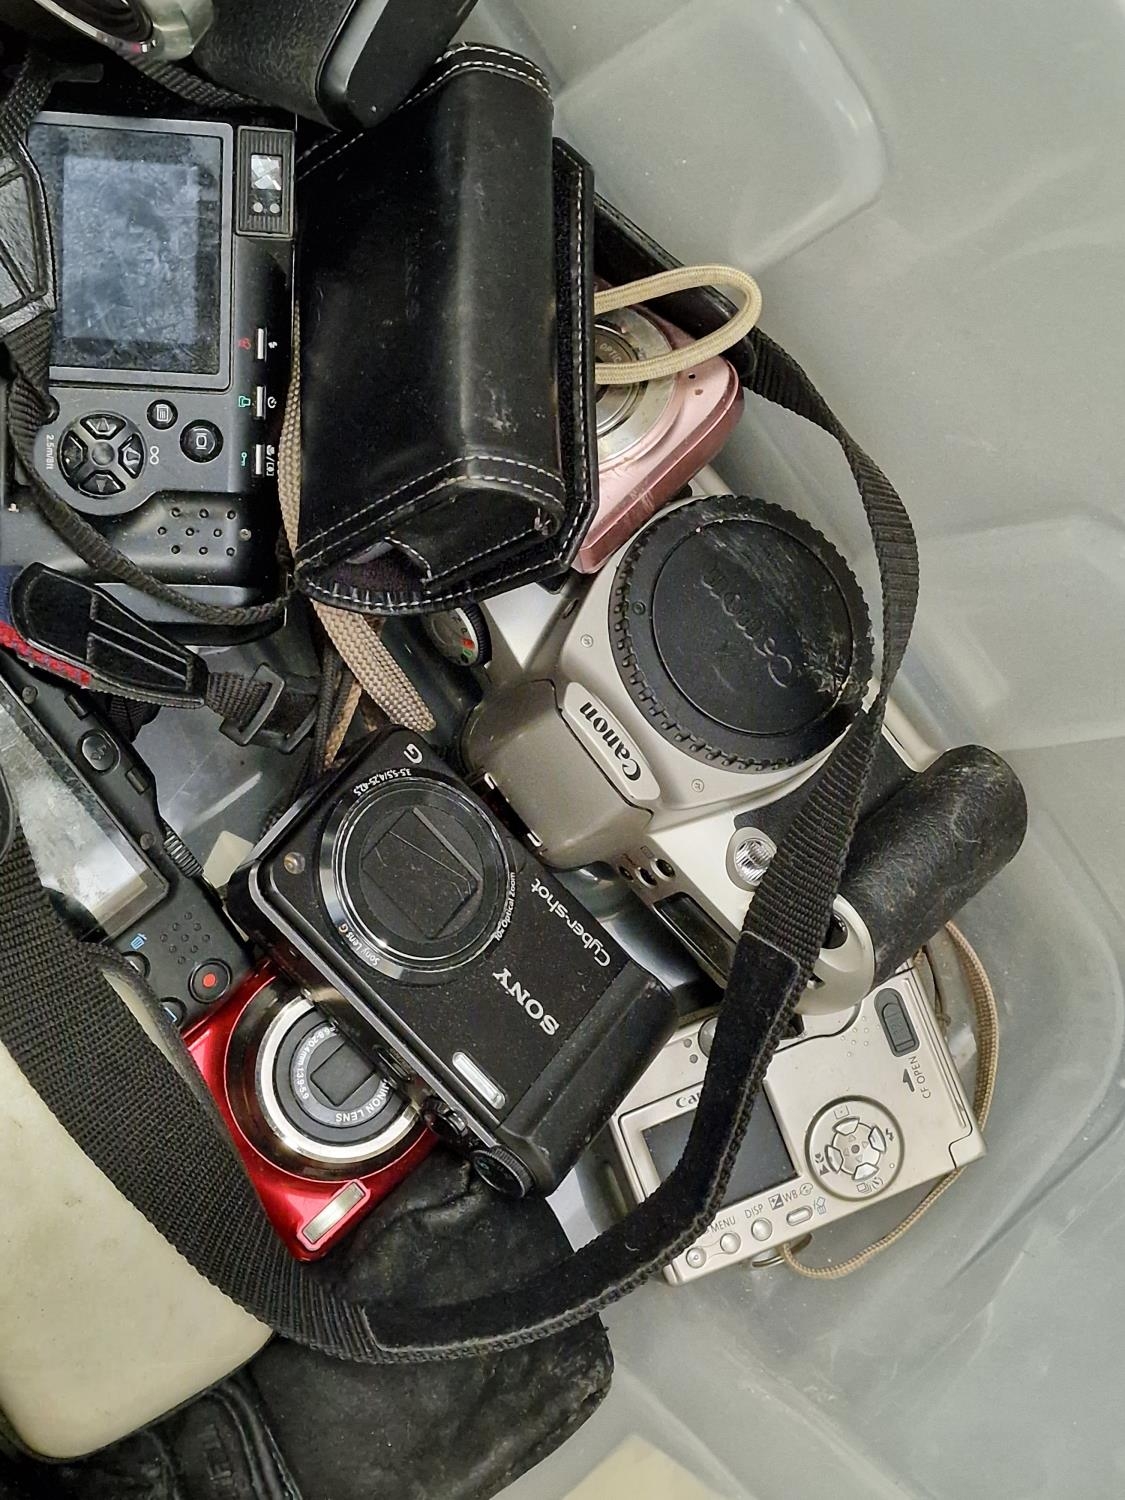 Collection of various compact digital cameras and accessories. - Image 2 of 3